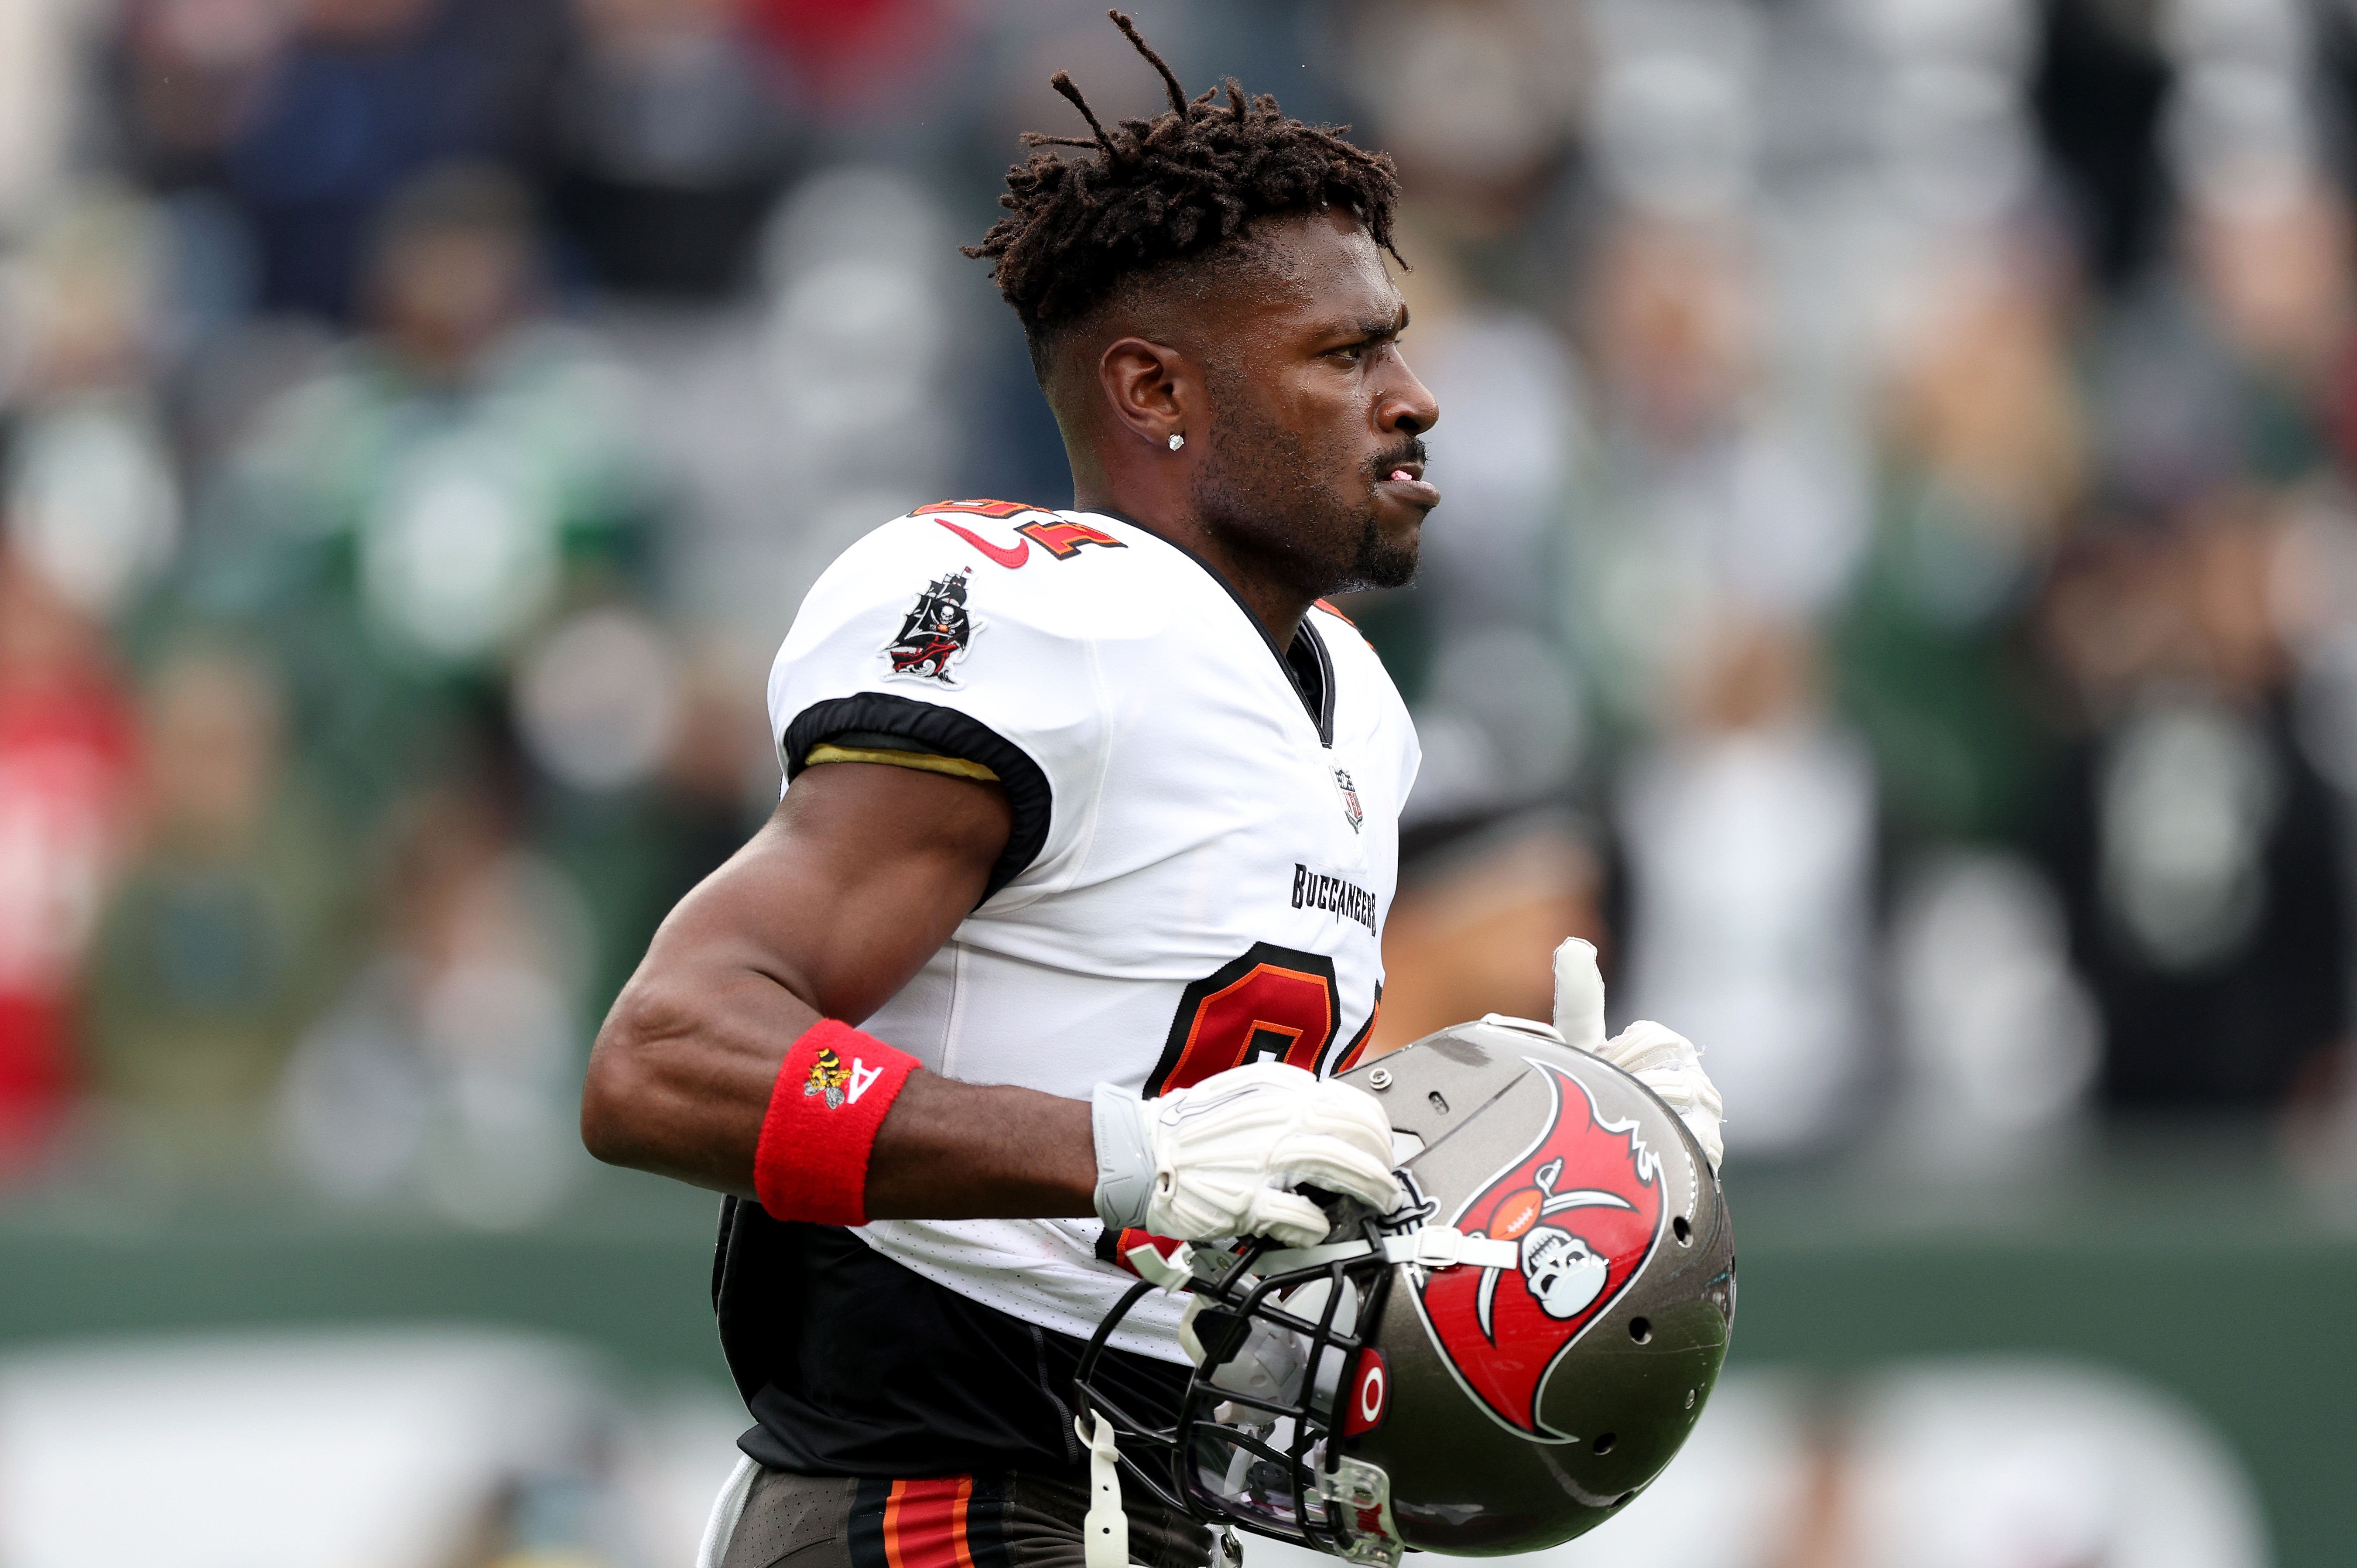 Antonio Brown Thanks Bucs for Opportunity After Taking Off Uniform, Exiting vs. Jets